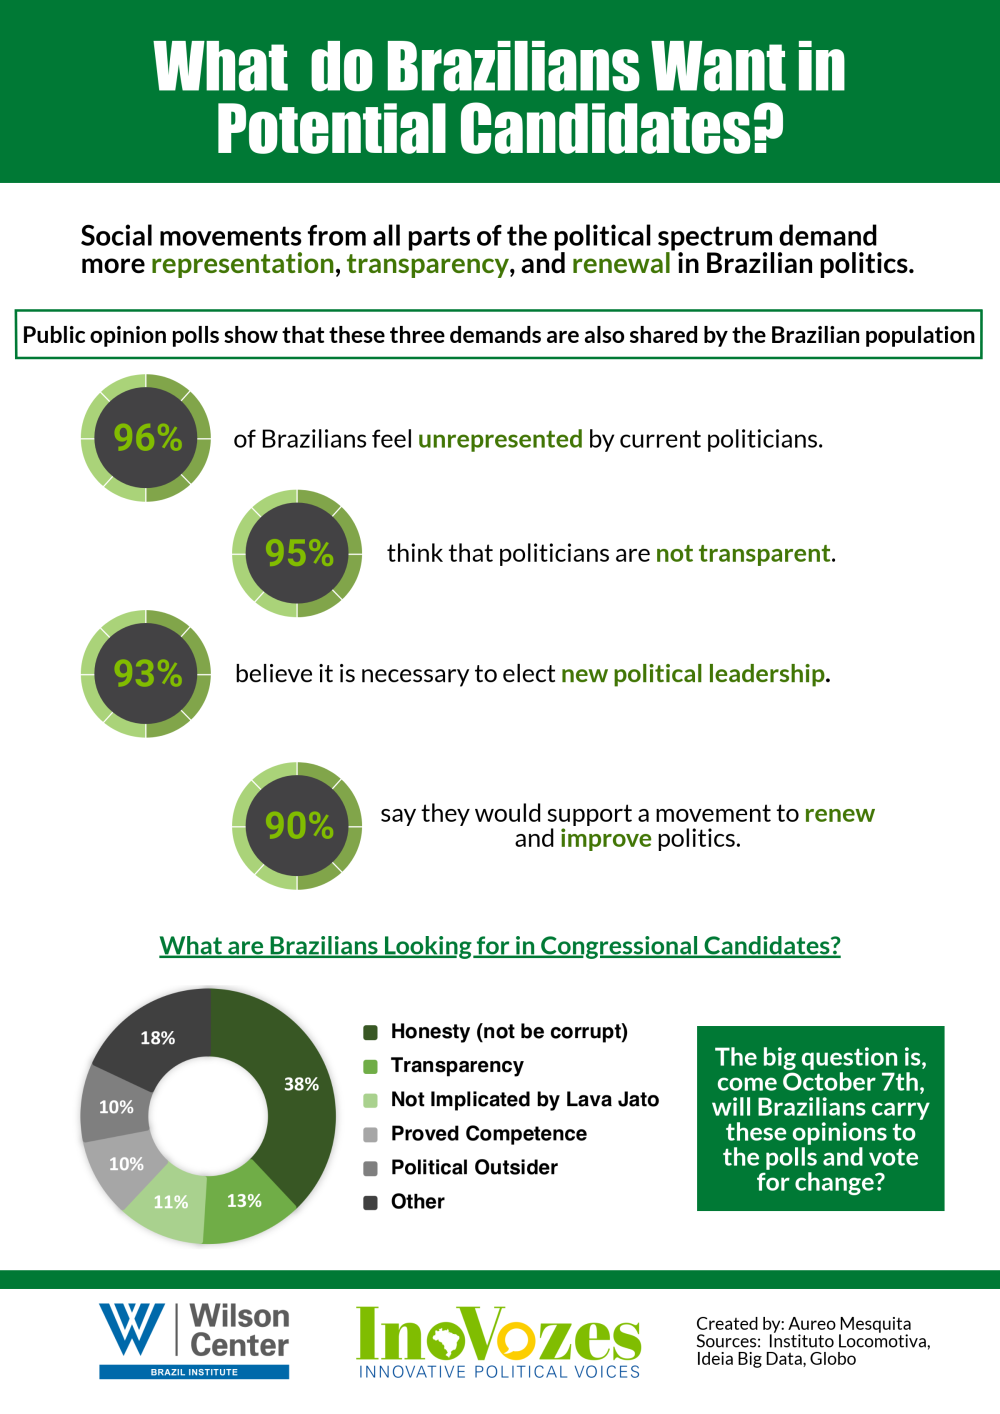 What do Brazilians Want in a Potential Candidate?